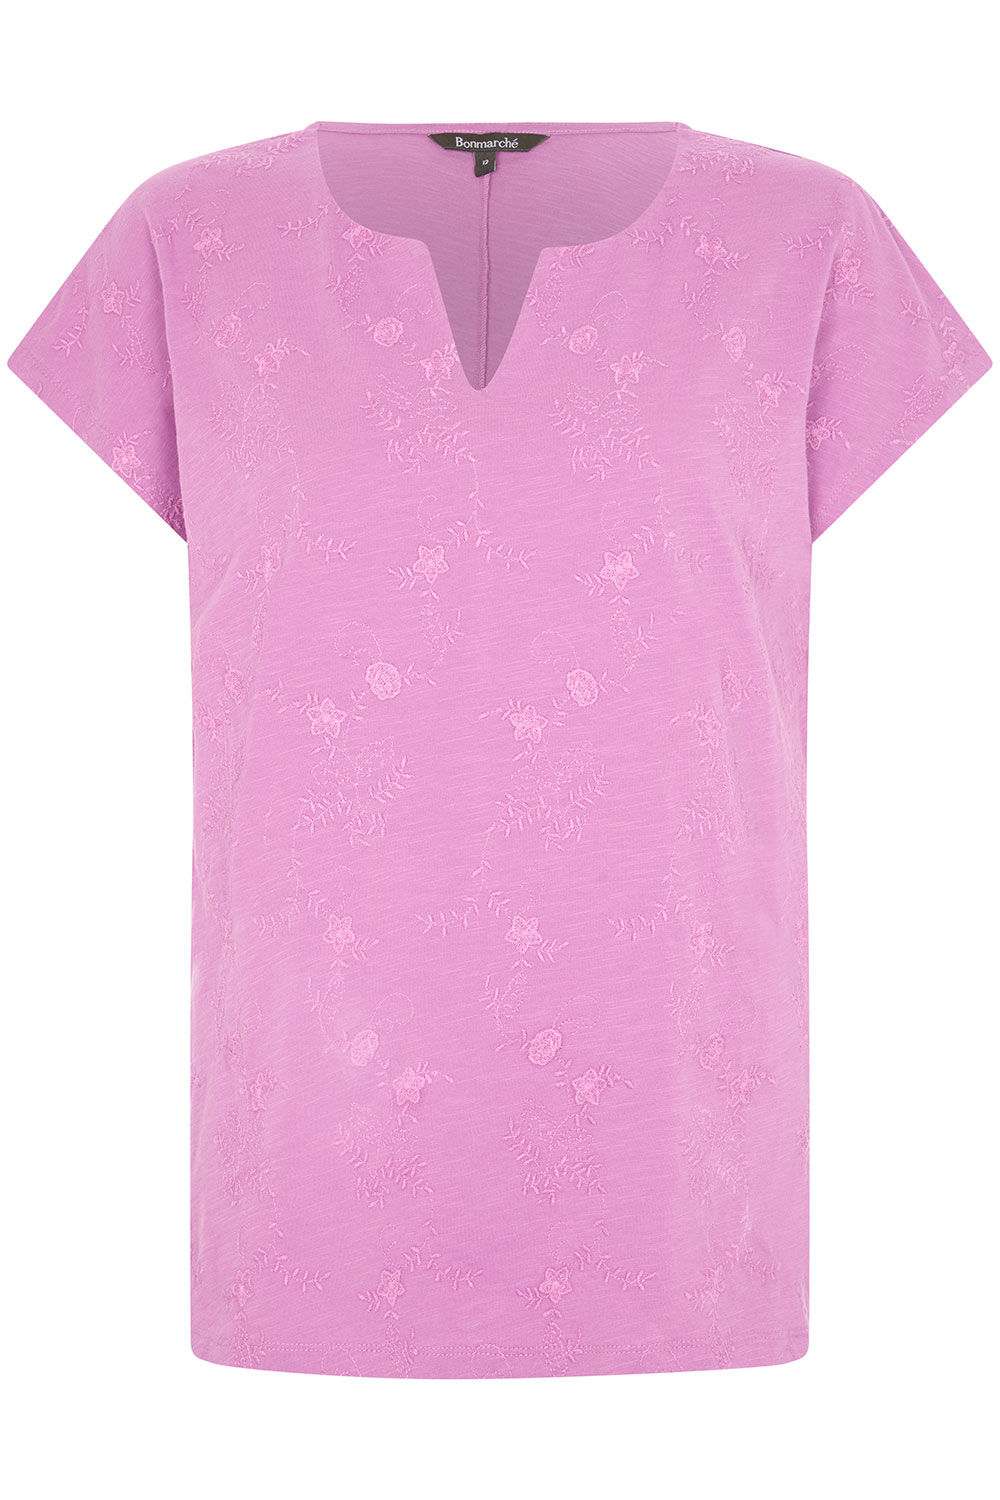 Bonmarche Magenta Short Sleeve Embroidered Front Notch Neck T-Shirt, Size: 18